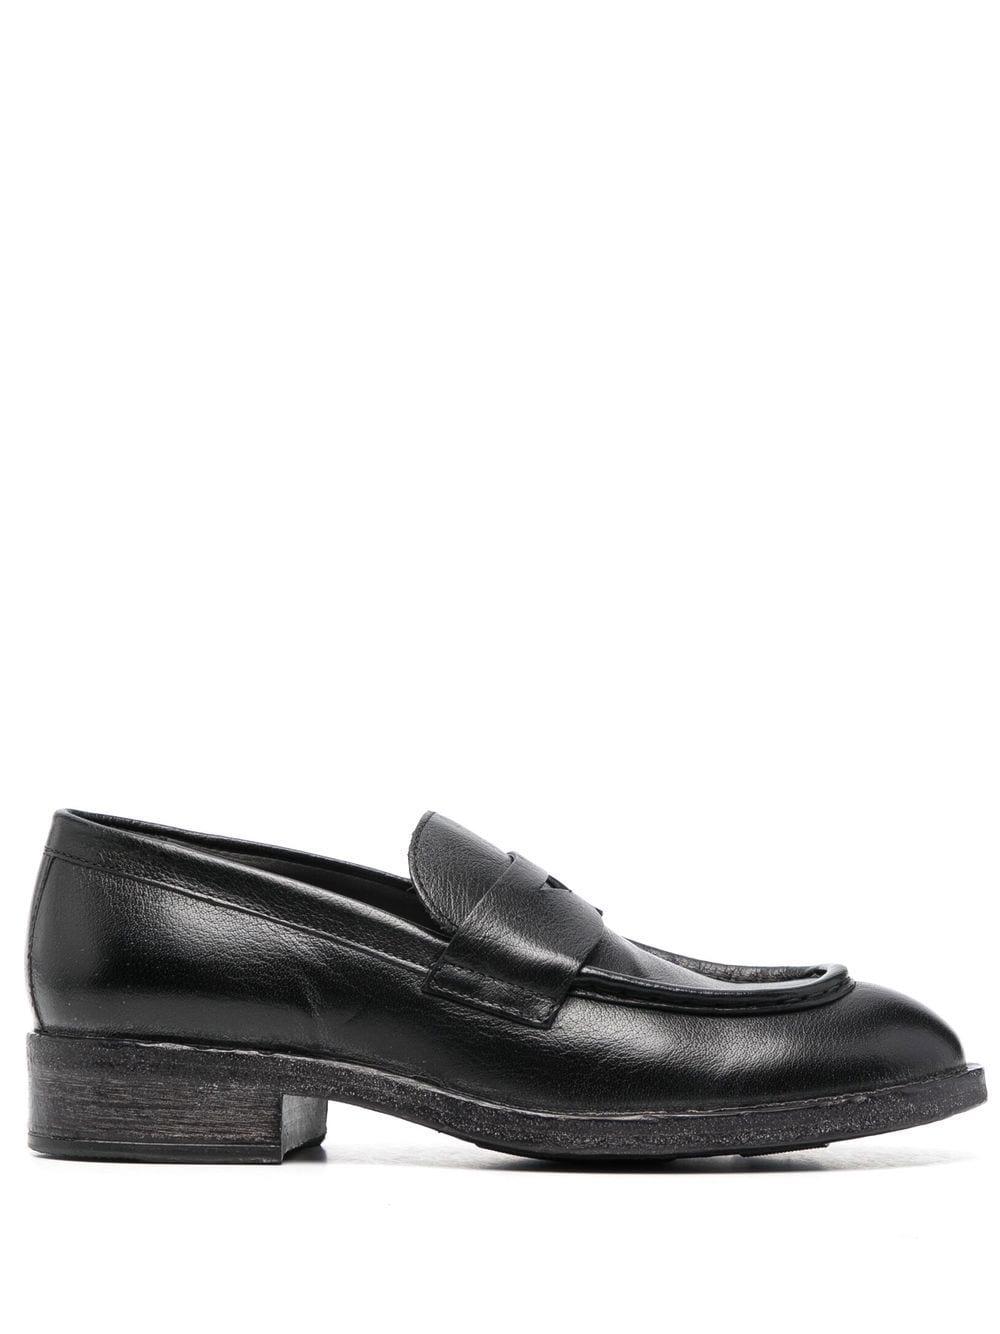 Moma Polished Finish Calf Leather Loafers in Black | Lyst